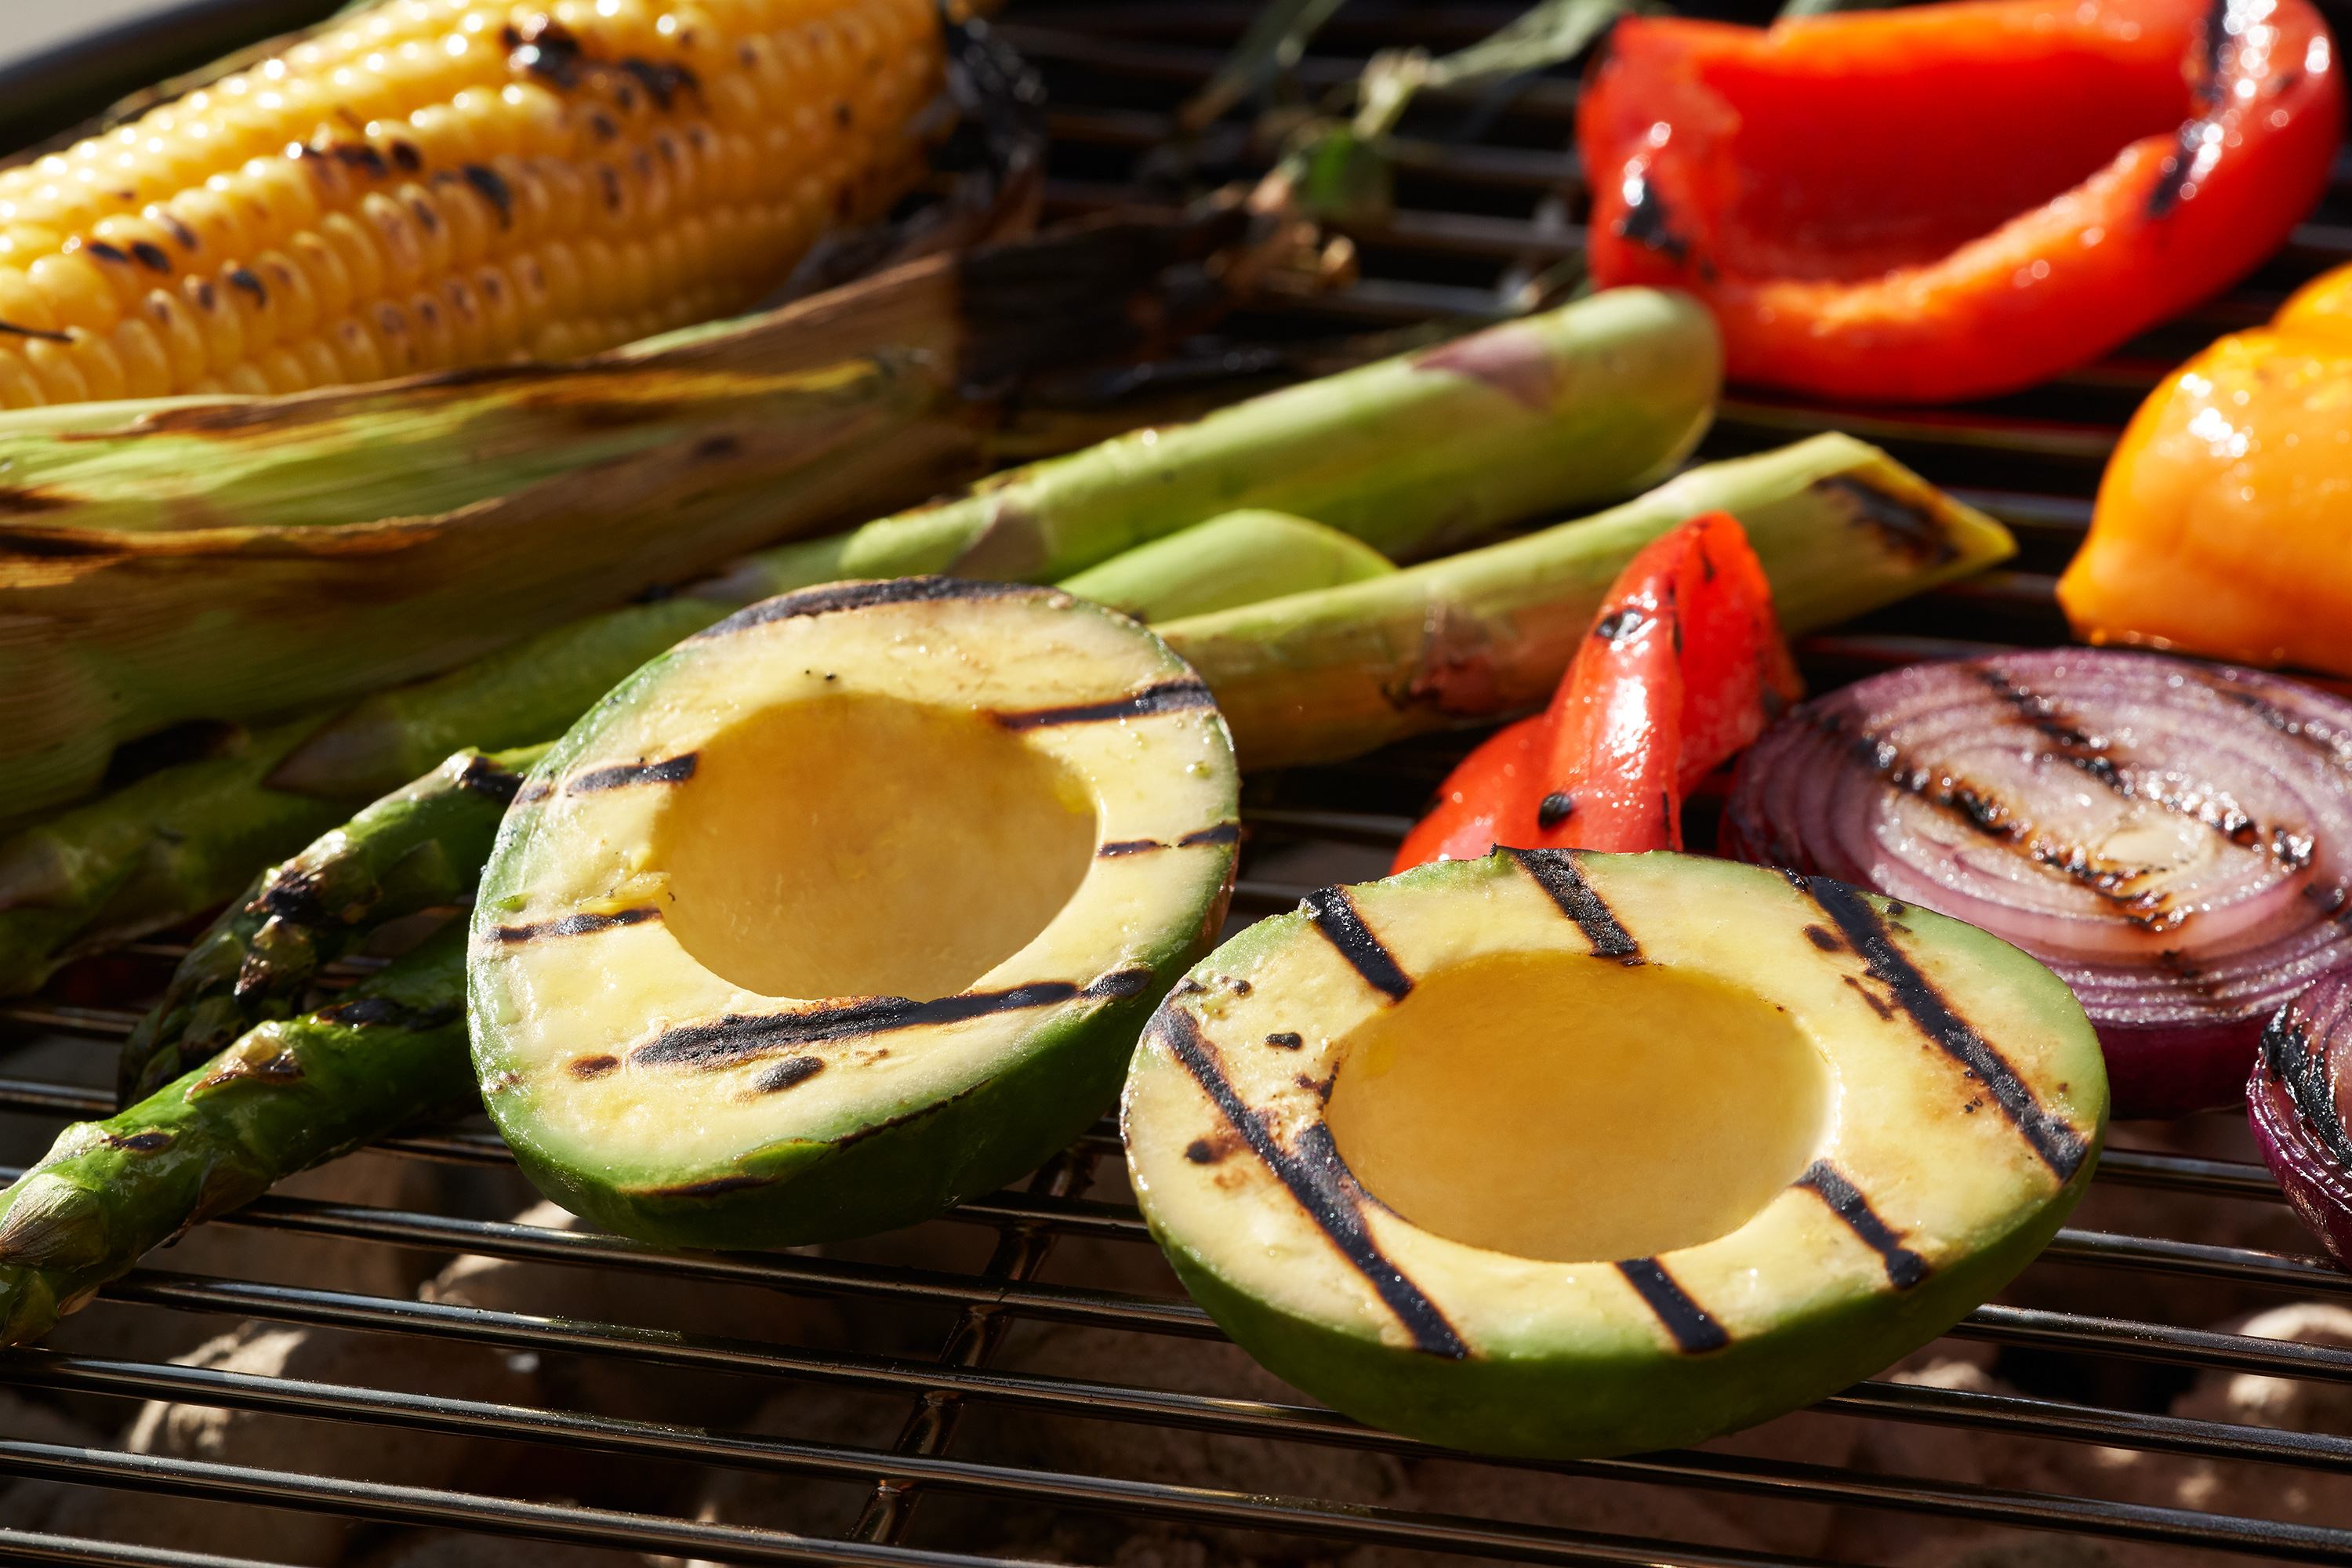 Grilled California Avocados with other veggies